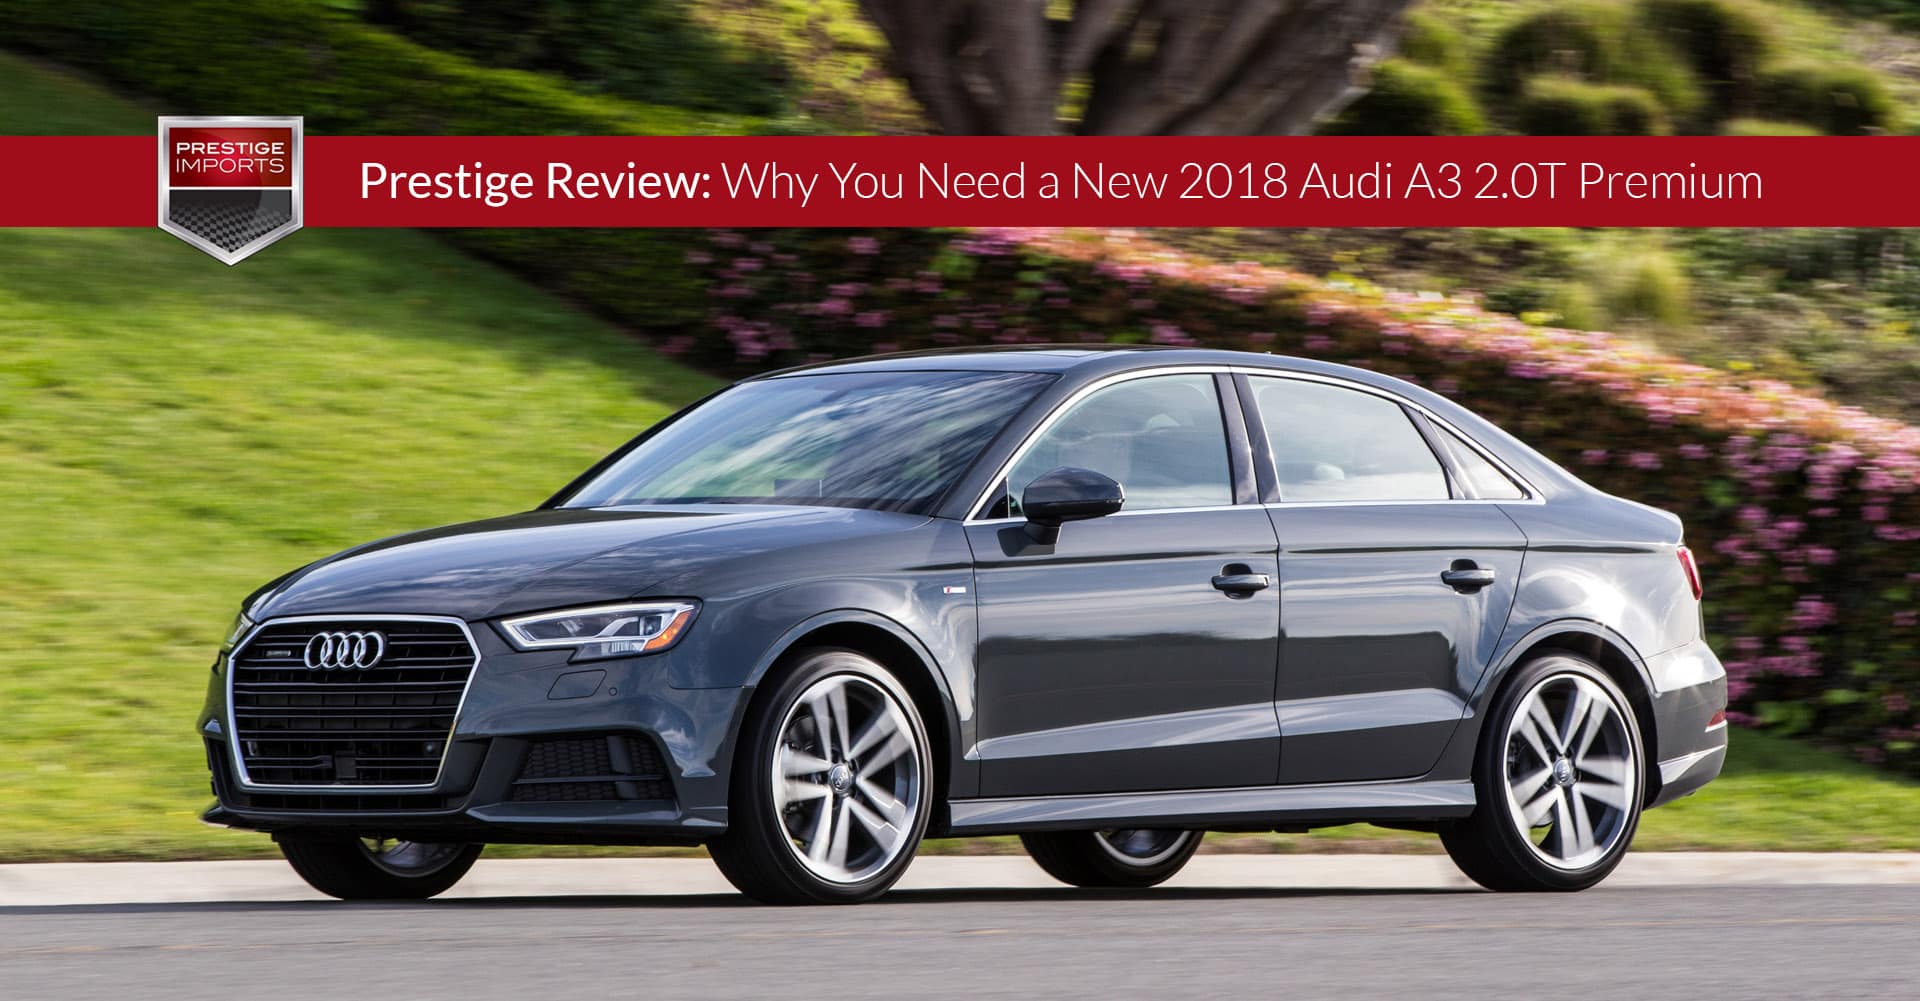 Prestige Review: Why You Need a New 2018 Audi A3 2.0T Premium